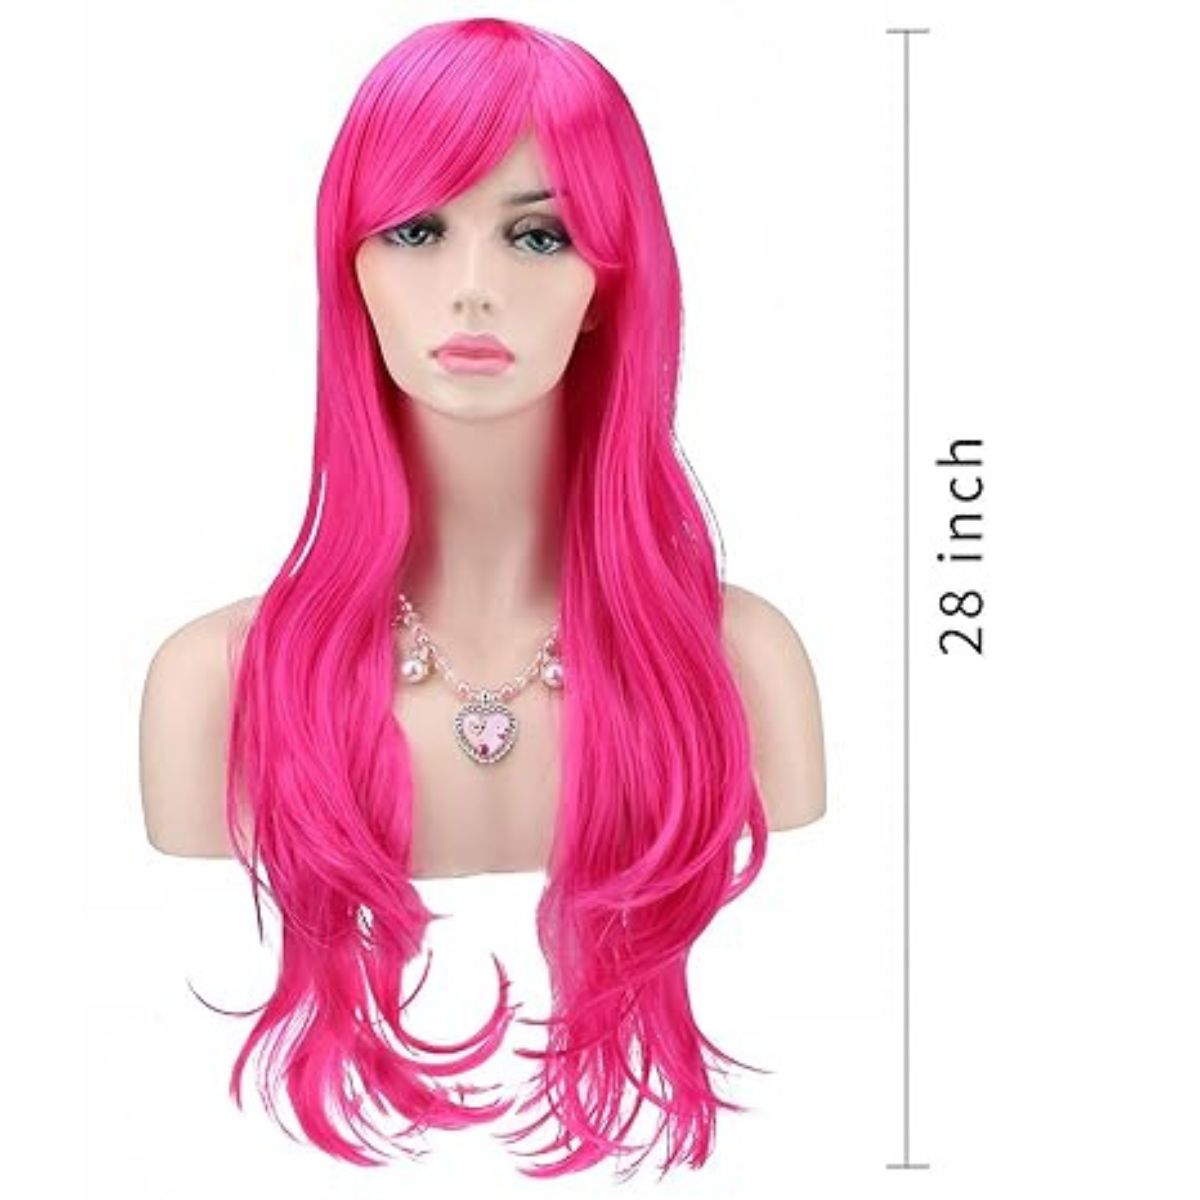 28 Inches Bright Hair Wig with Cap